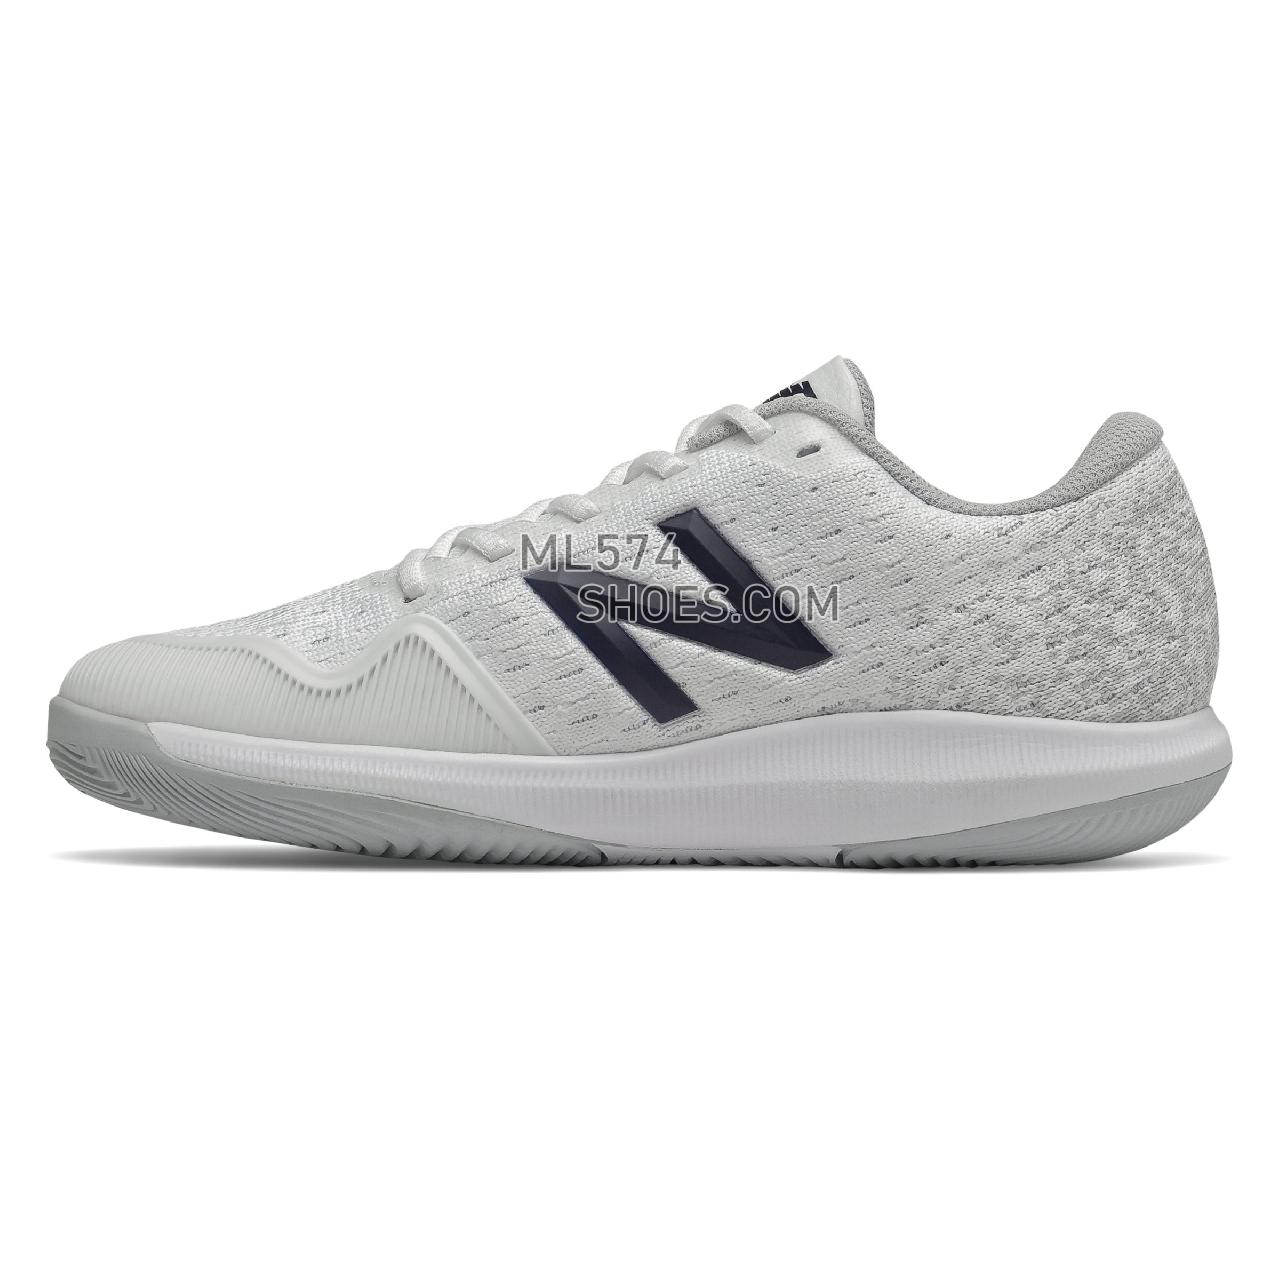 New Balance FuelCell 996v4 - Women's Tennis - White with Grey - WCH996W4